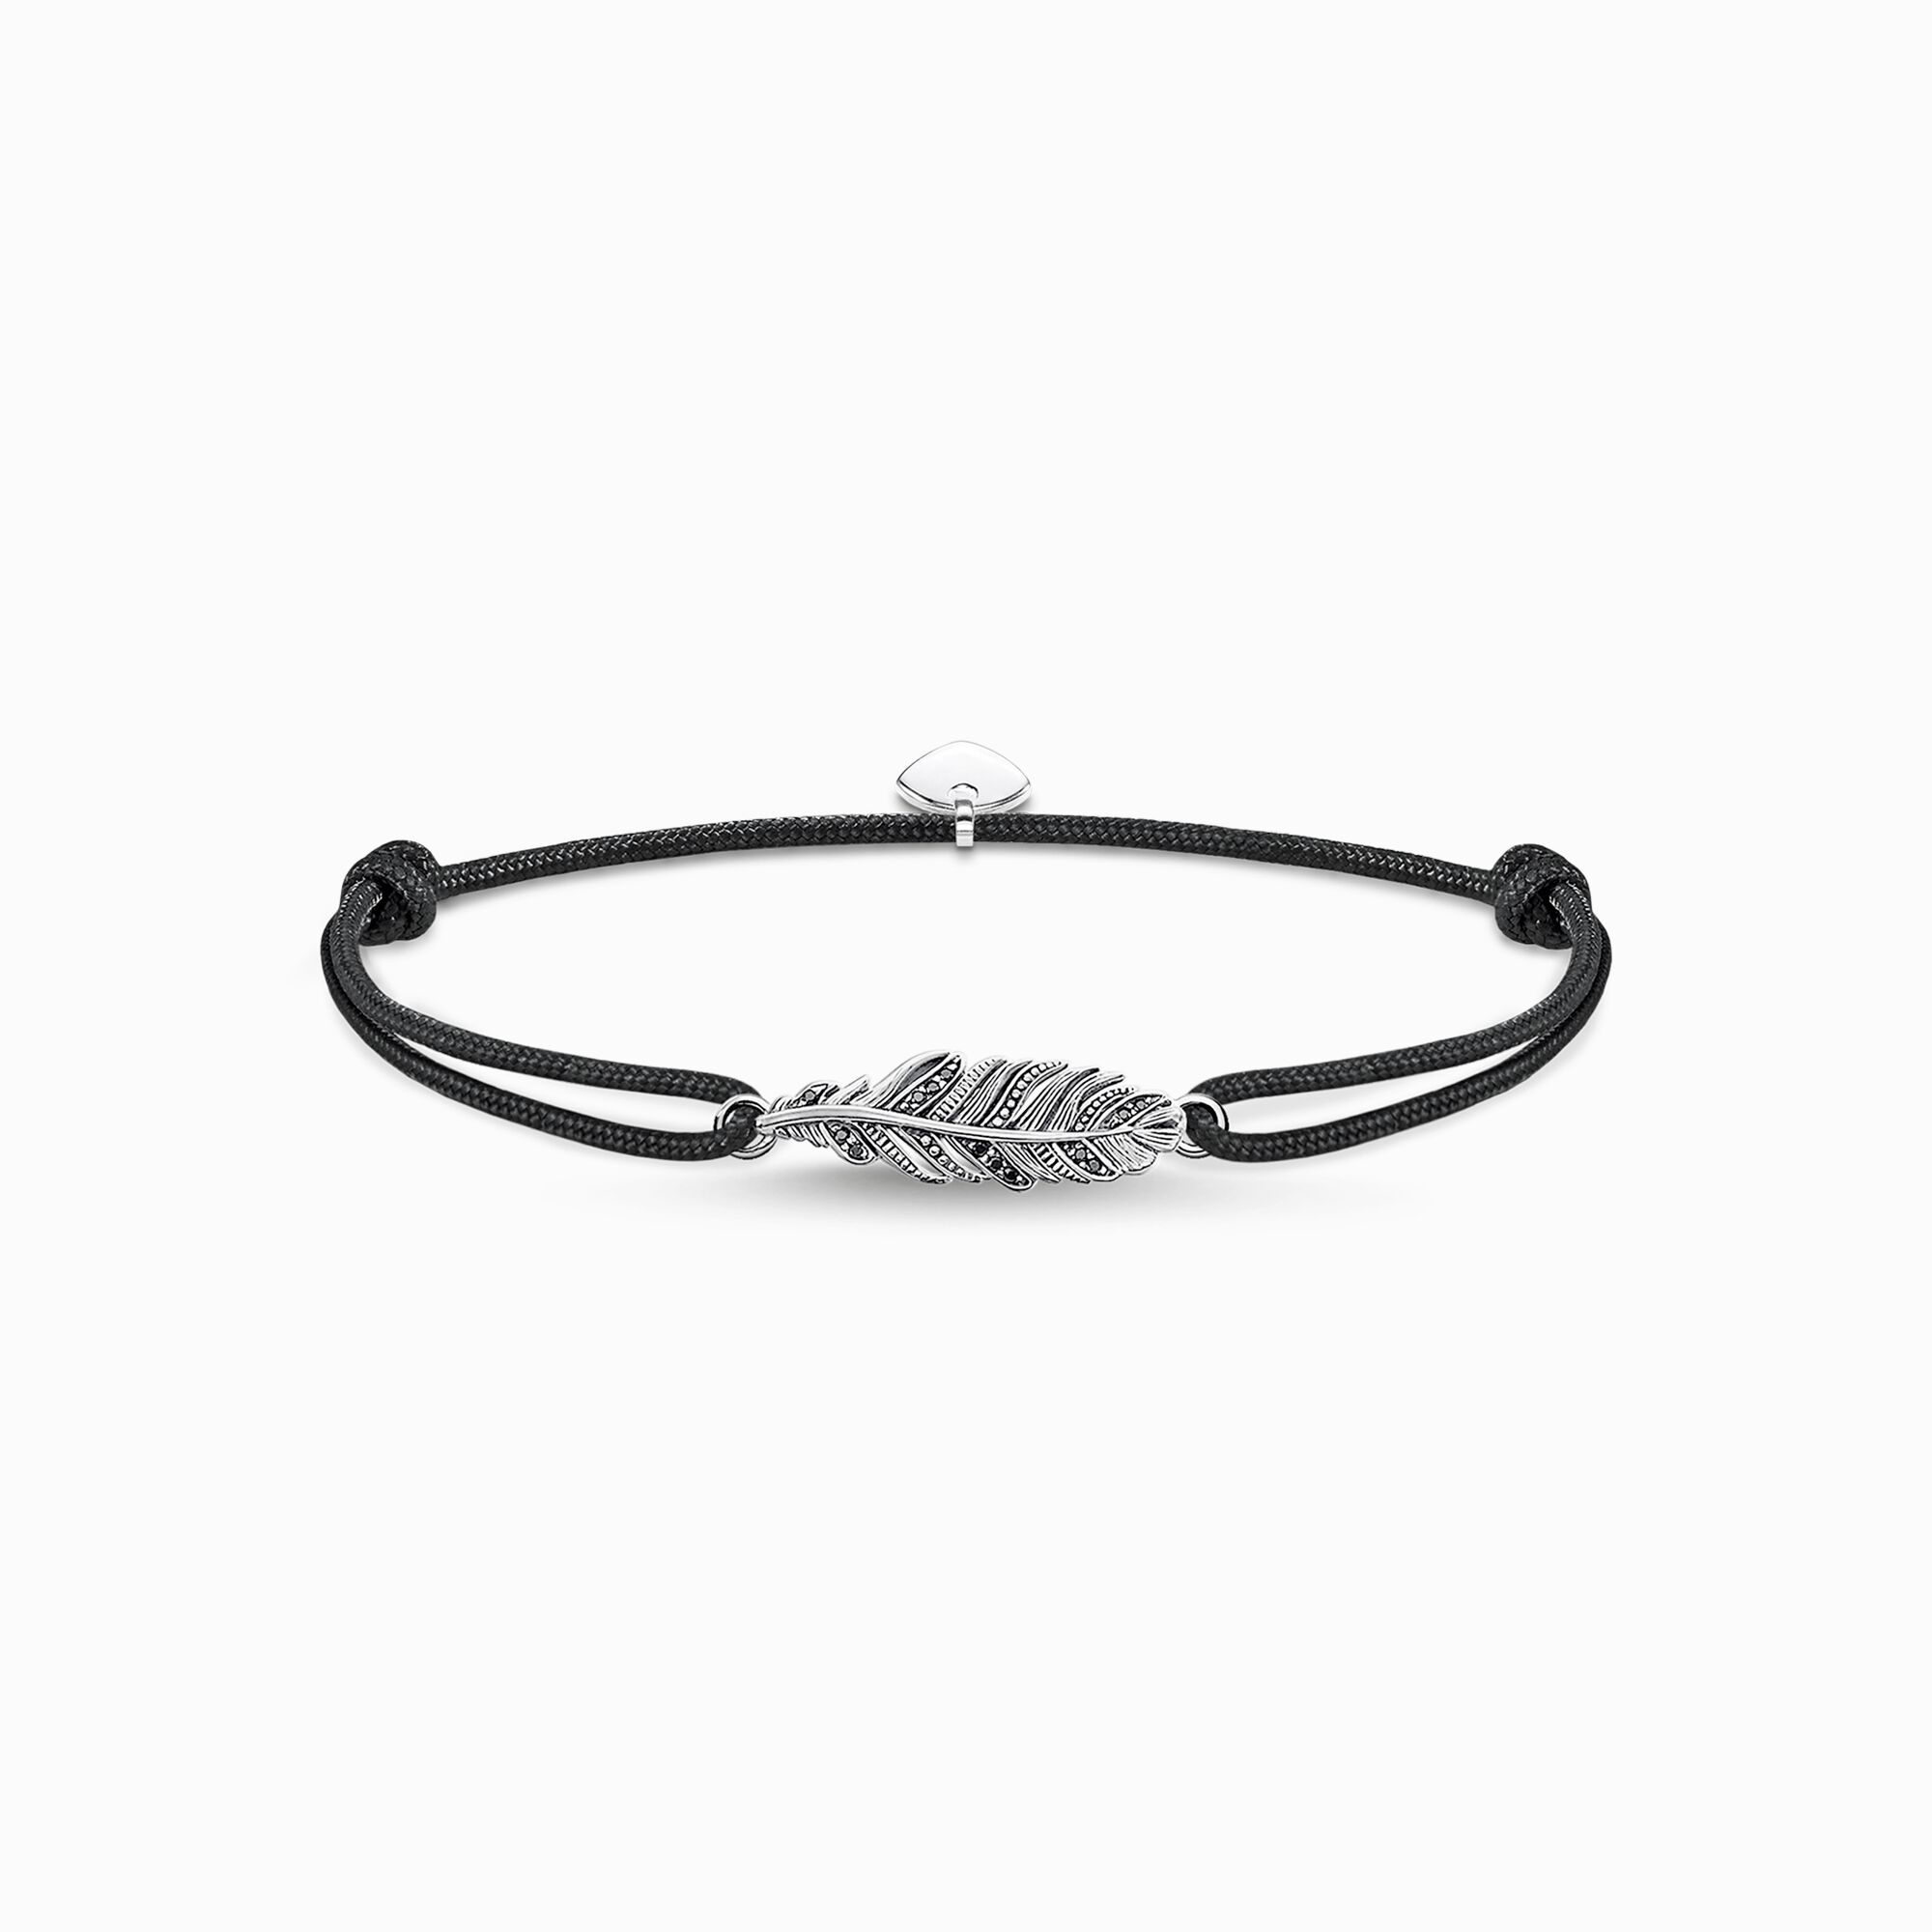 Bracelet Little Secret feather from the  collection in the THOMAS SABO online store